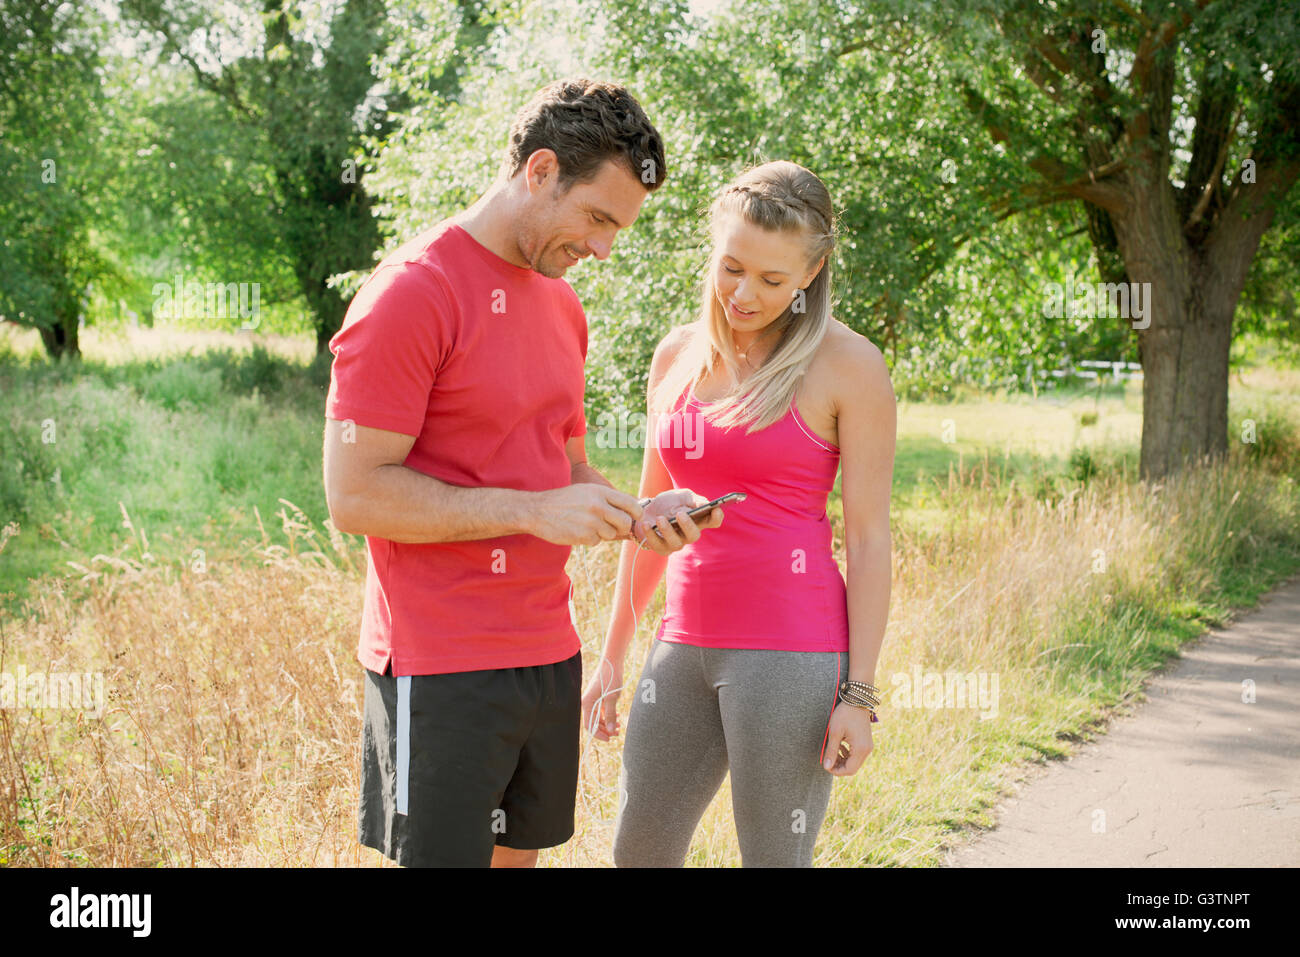 Two joggers chatting in a park Stock Photo